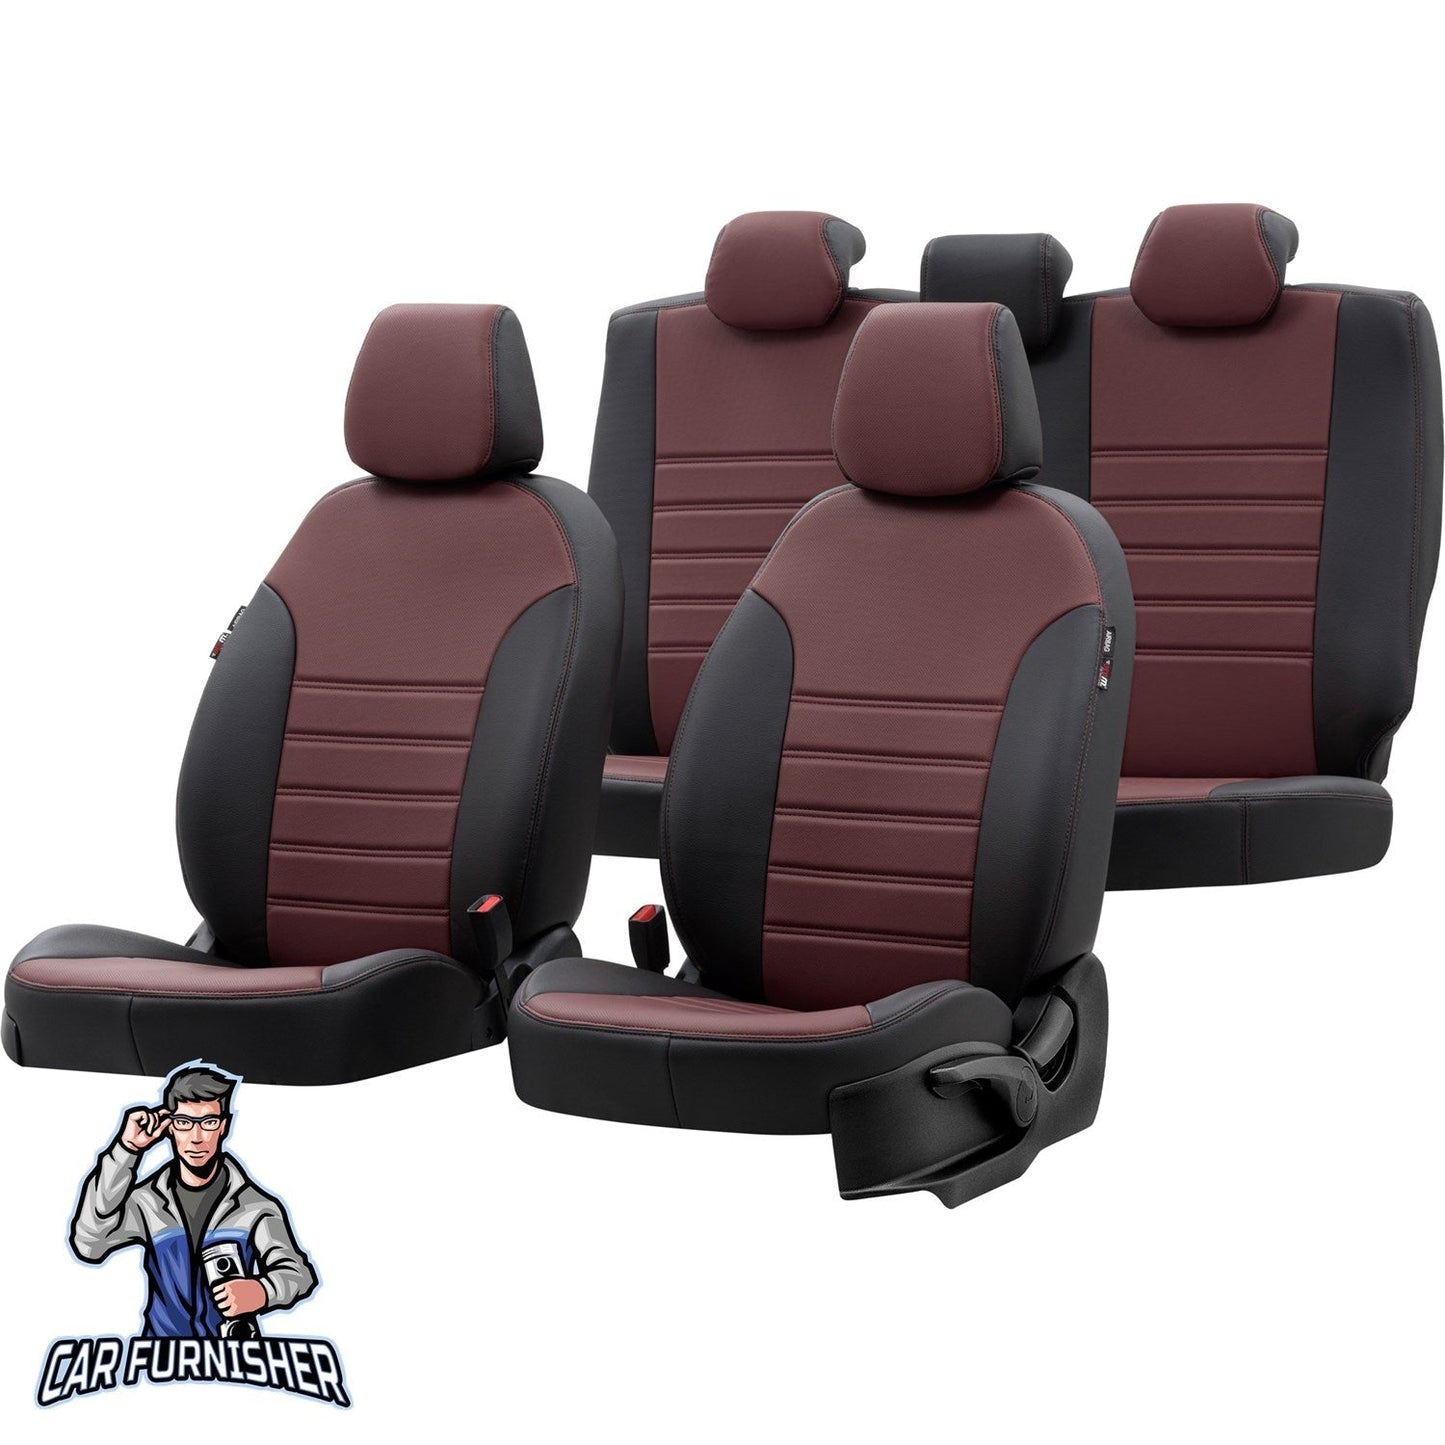 Mercedes Vaneo Seat Cover Istanbul Leather Design Burgundy Leather